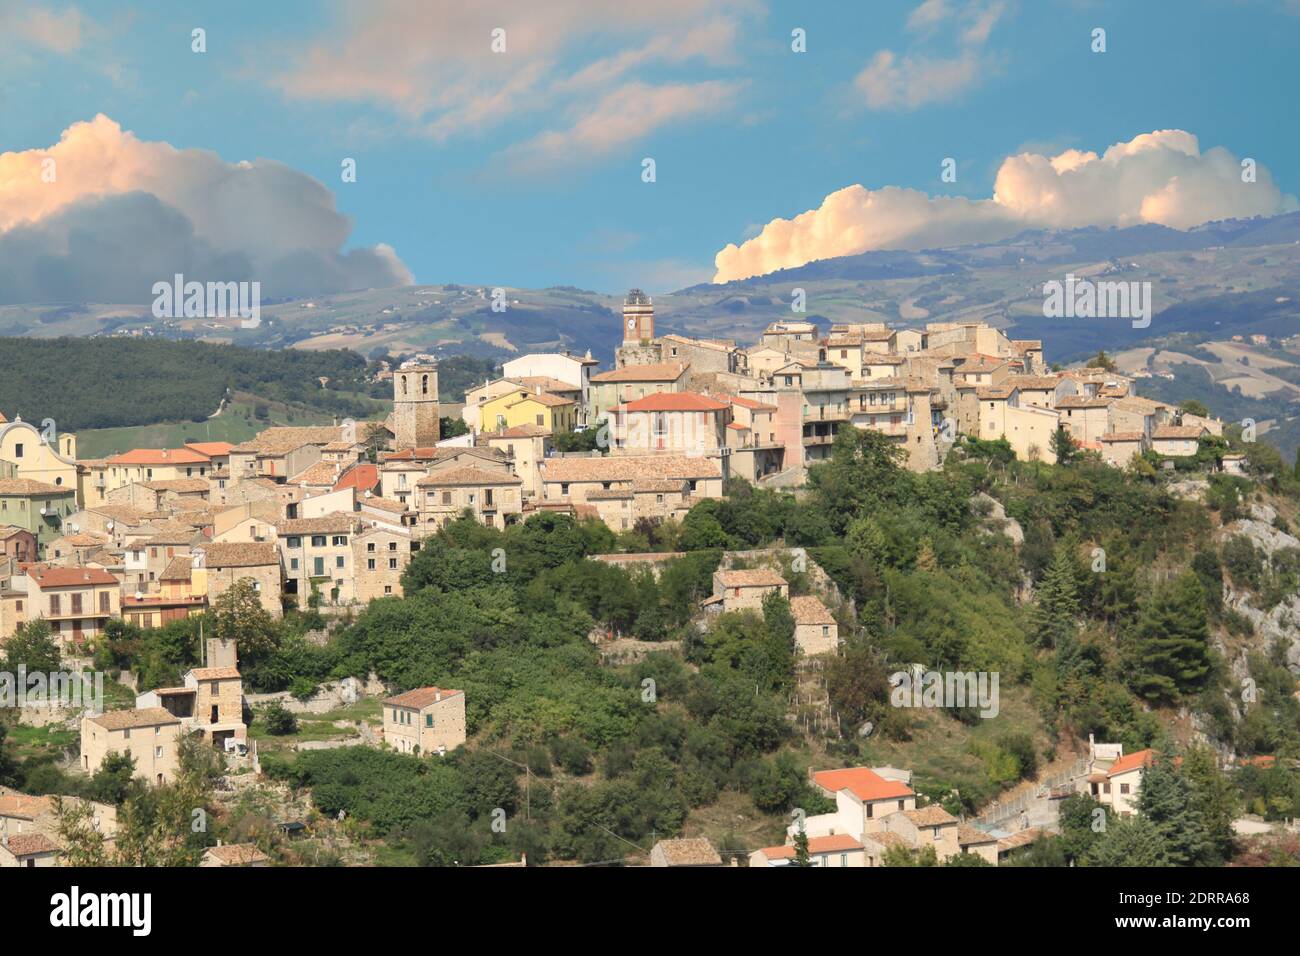 An aerial view of the a village on a hill at Castropignano, Campobasso, Molise in Italy Stock Photo